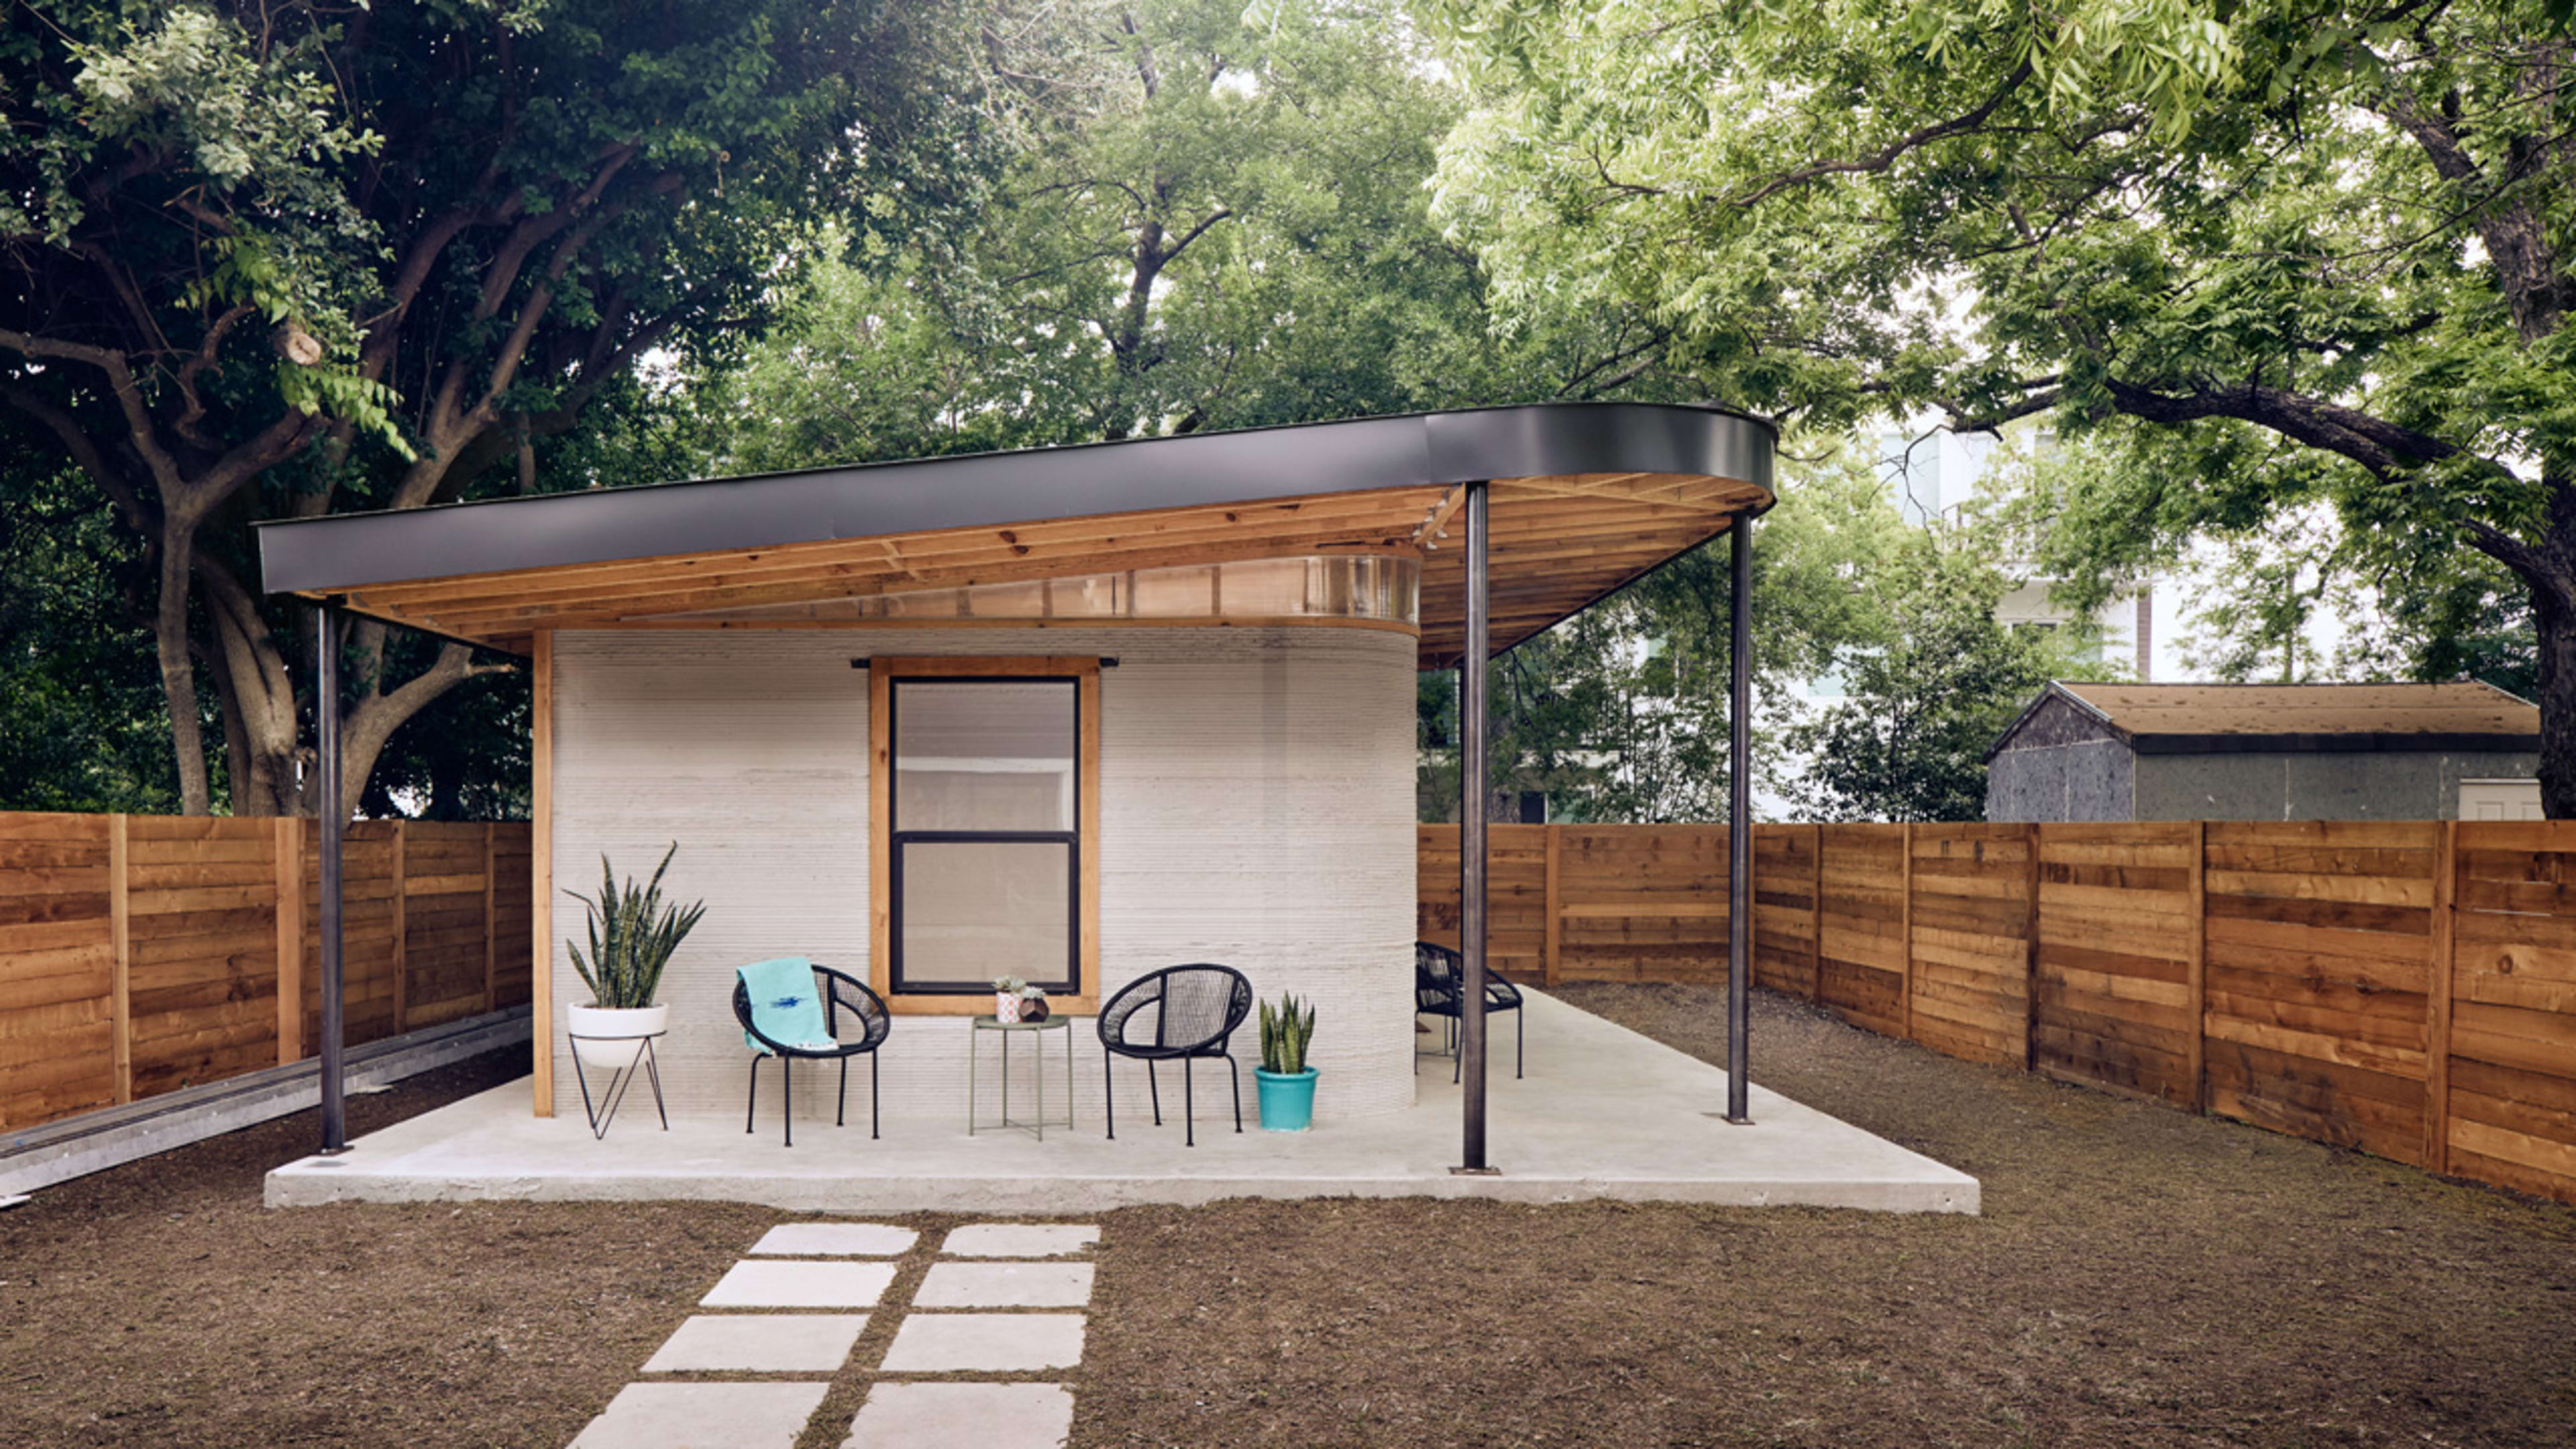 There will soon be a whole community of ultra-low-cost 3D-printed homes